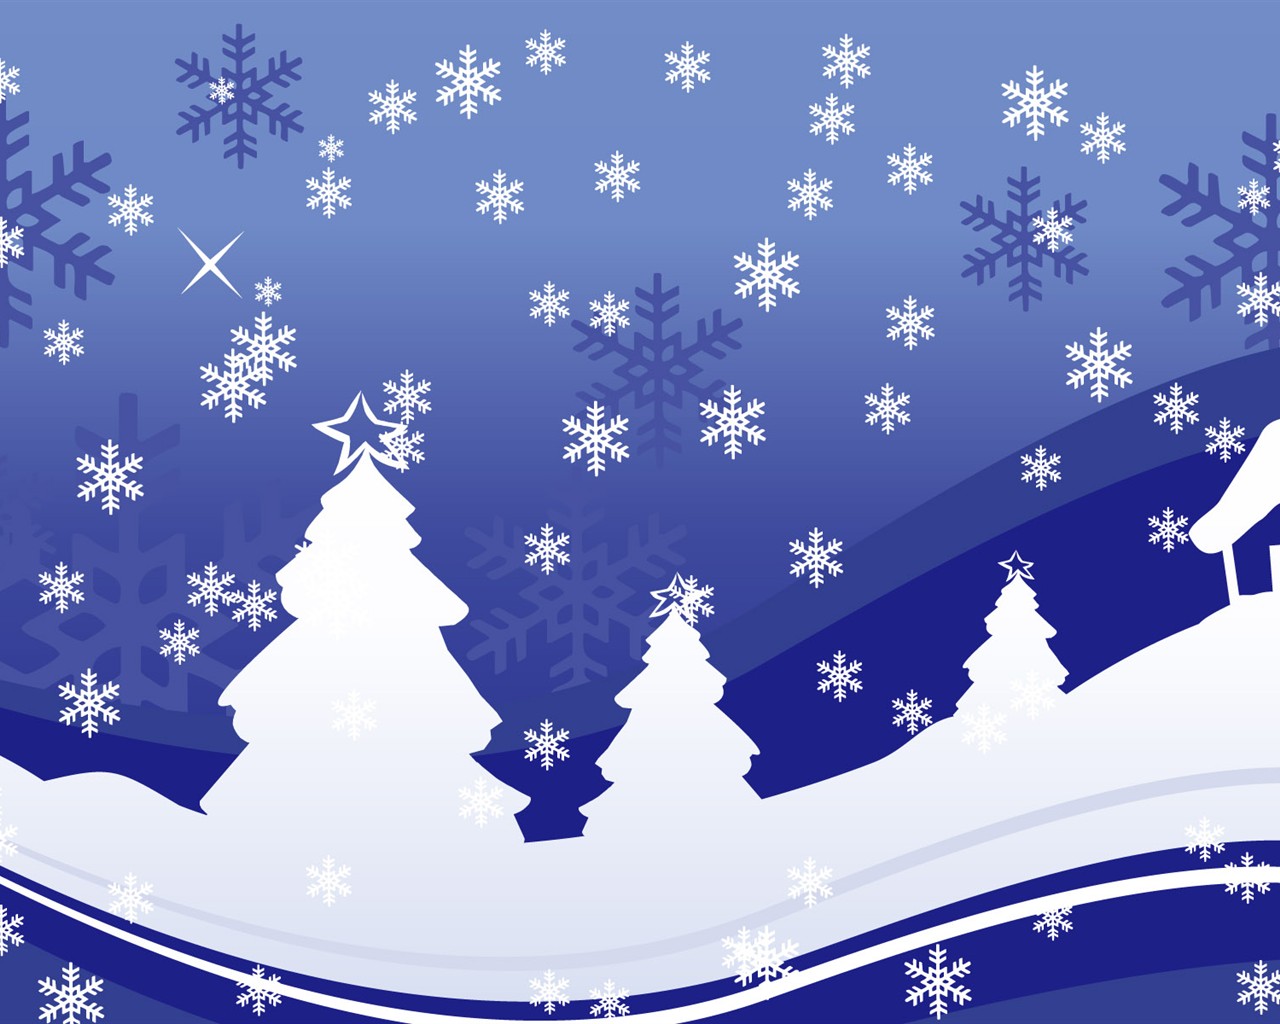 Exquisite Christmas Theme HD Wallpapers #33 - 1280x1024